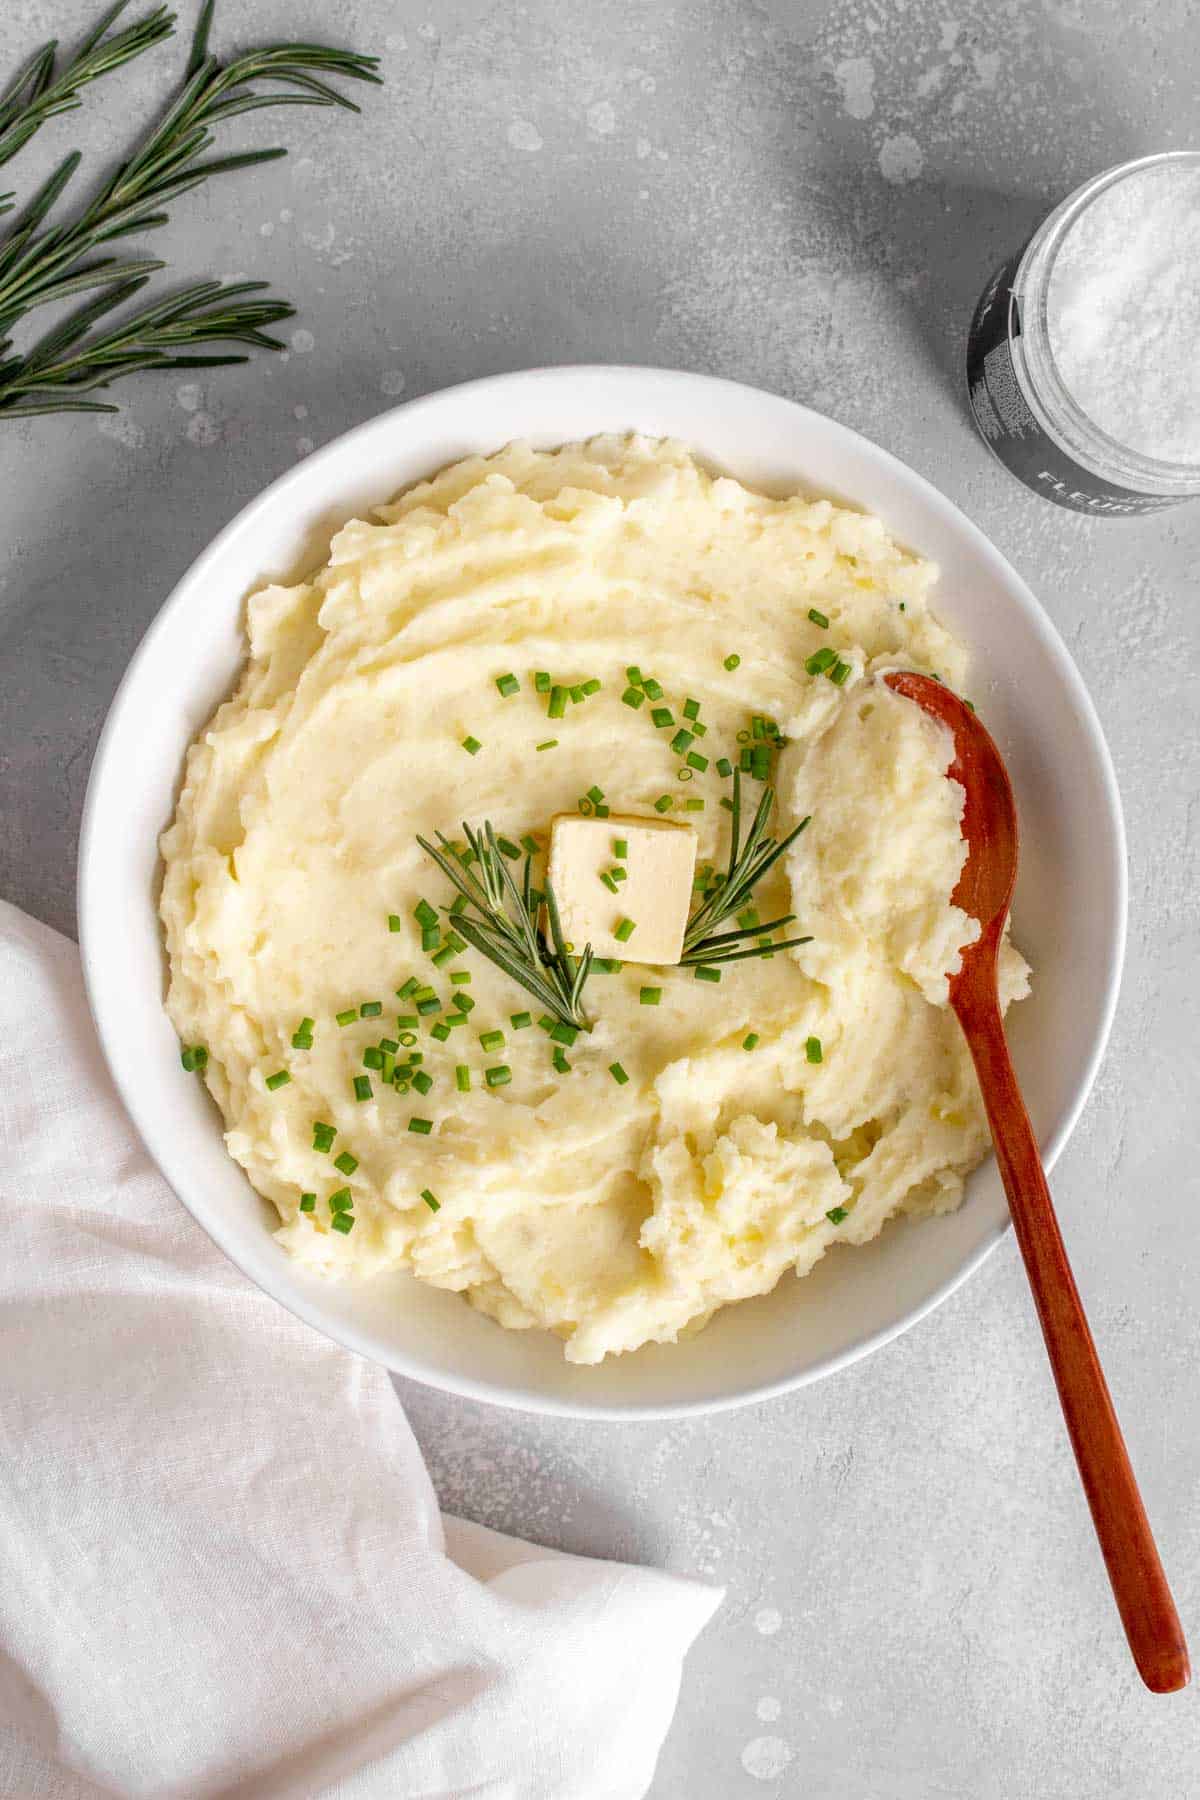 A bowl of rosemary mashed potatoes with a knob of butter, chives, and rosemary on top.